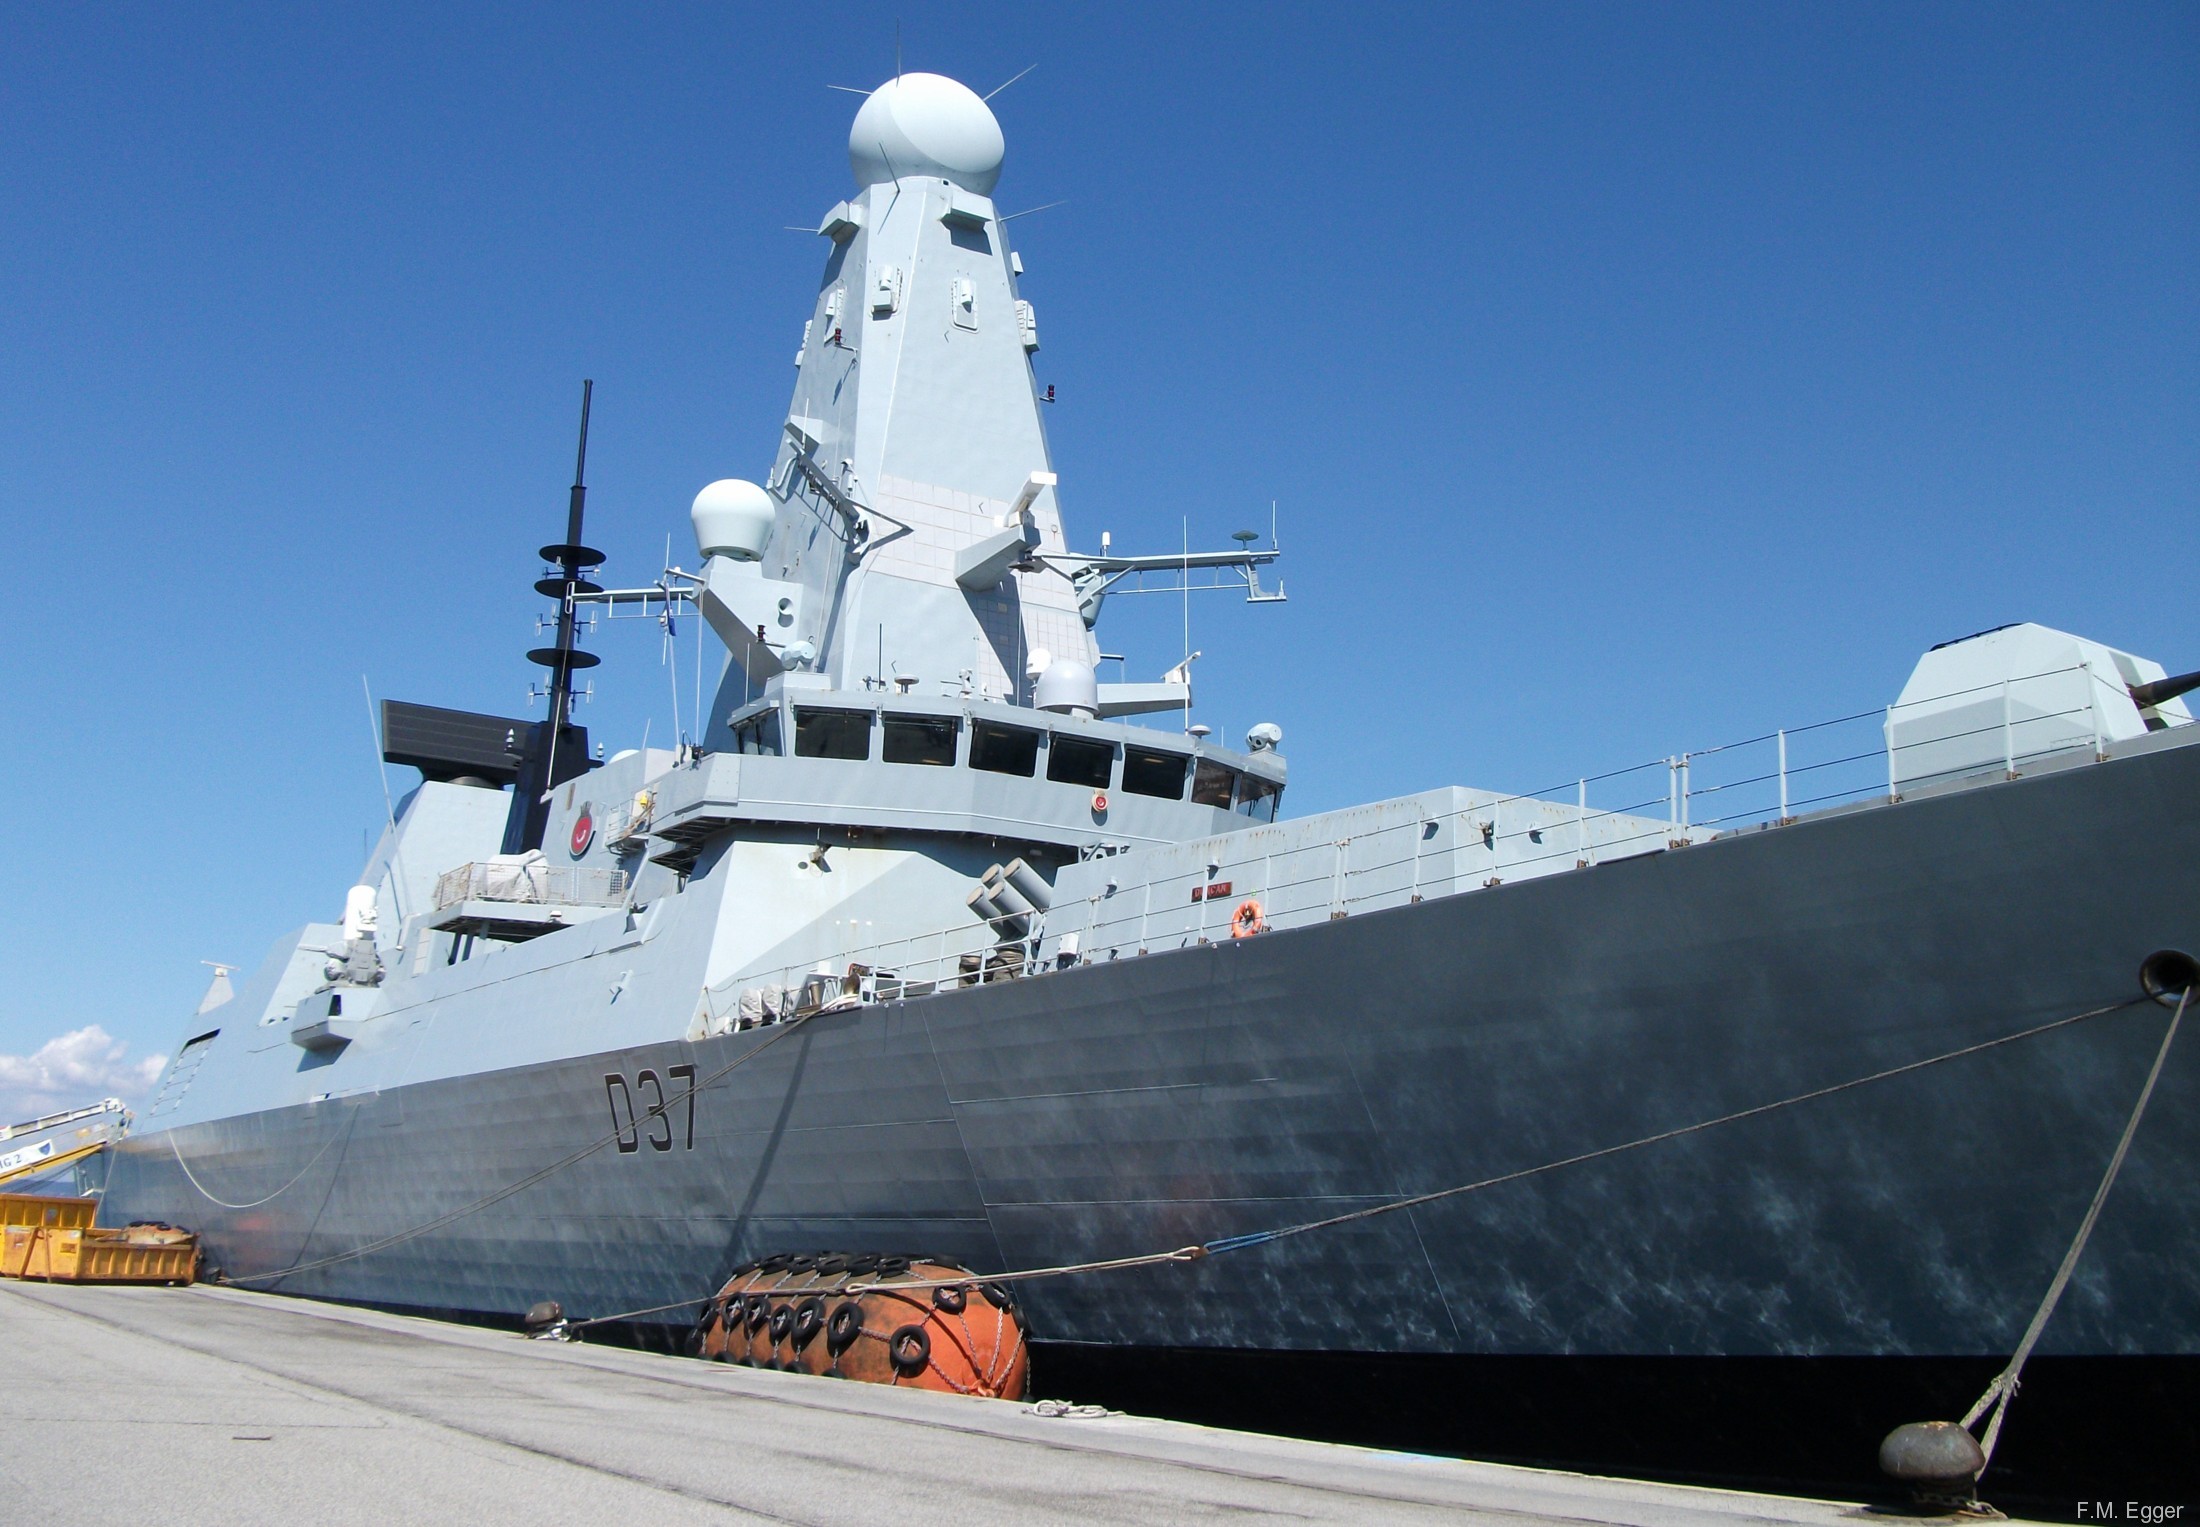 hms duncan d-37 type 45 daring class guided missile destroyer ddg royal navy sea viper paams 32 trieste italy snmg nato